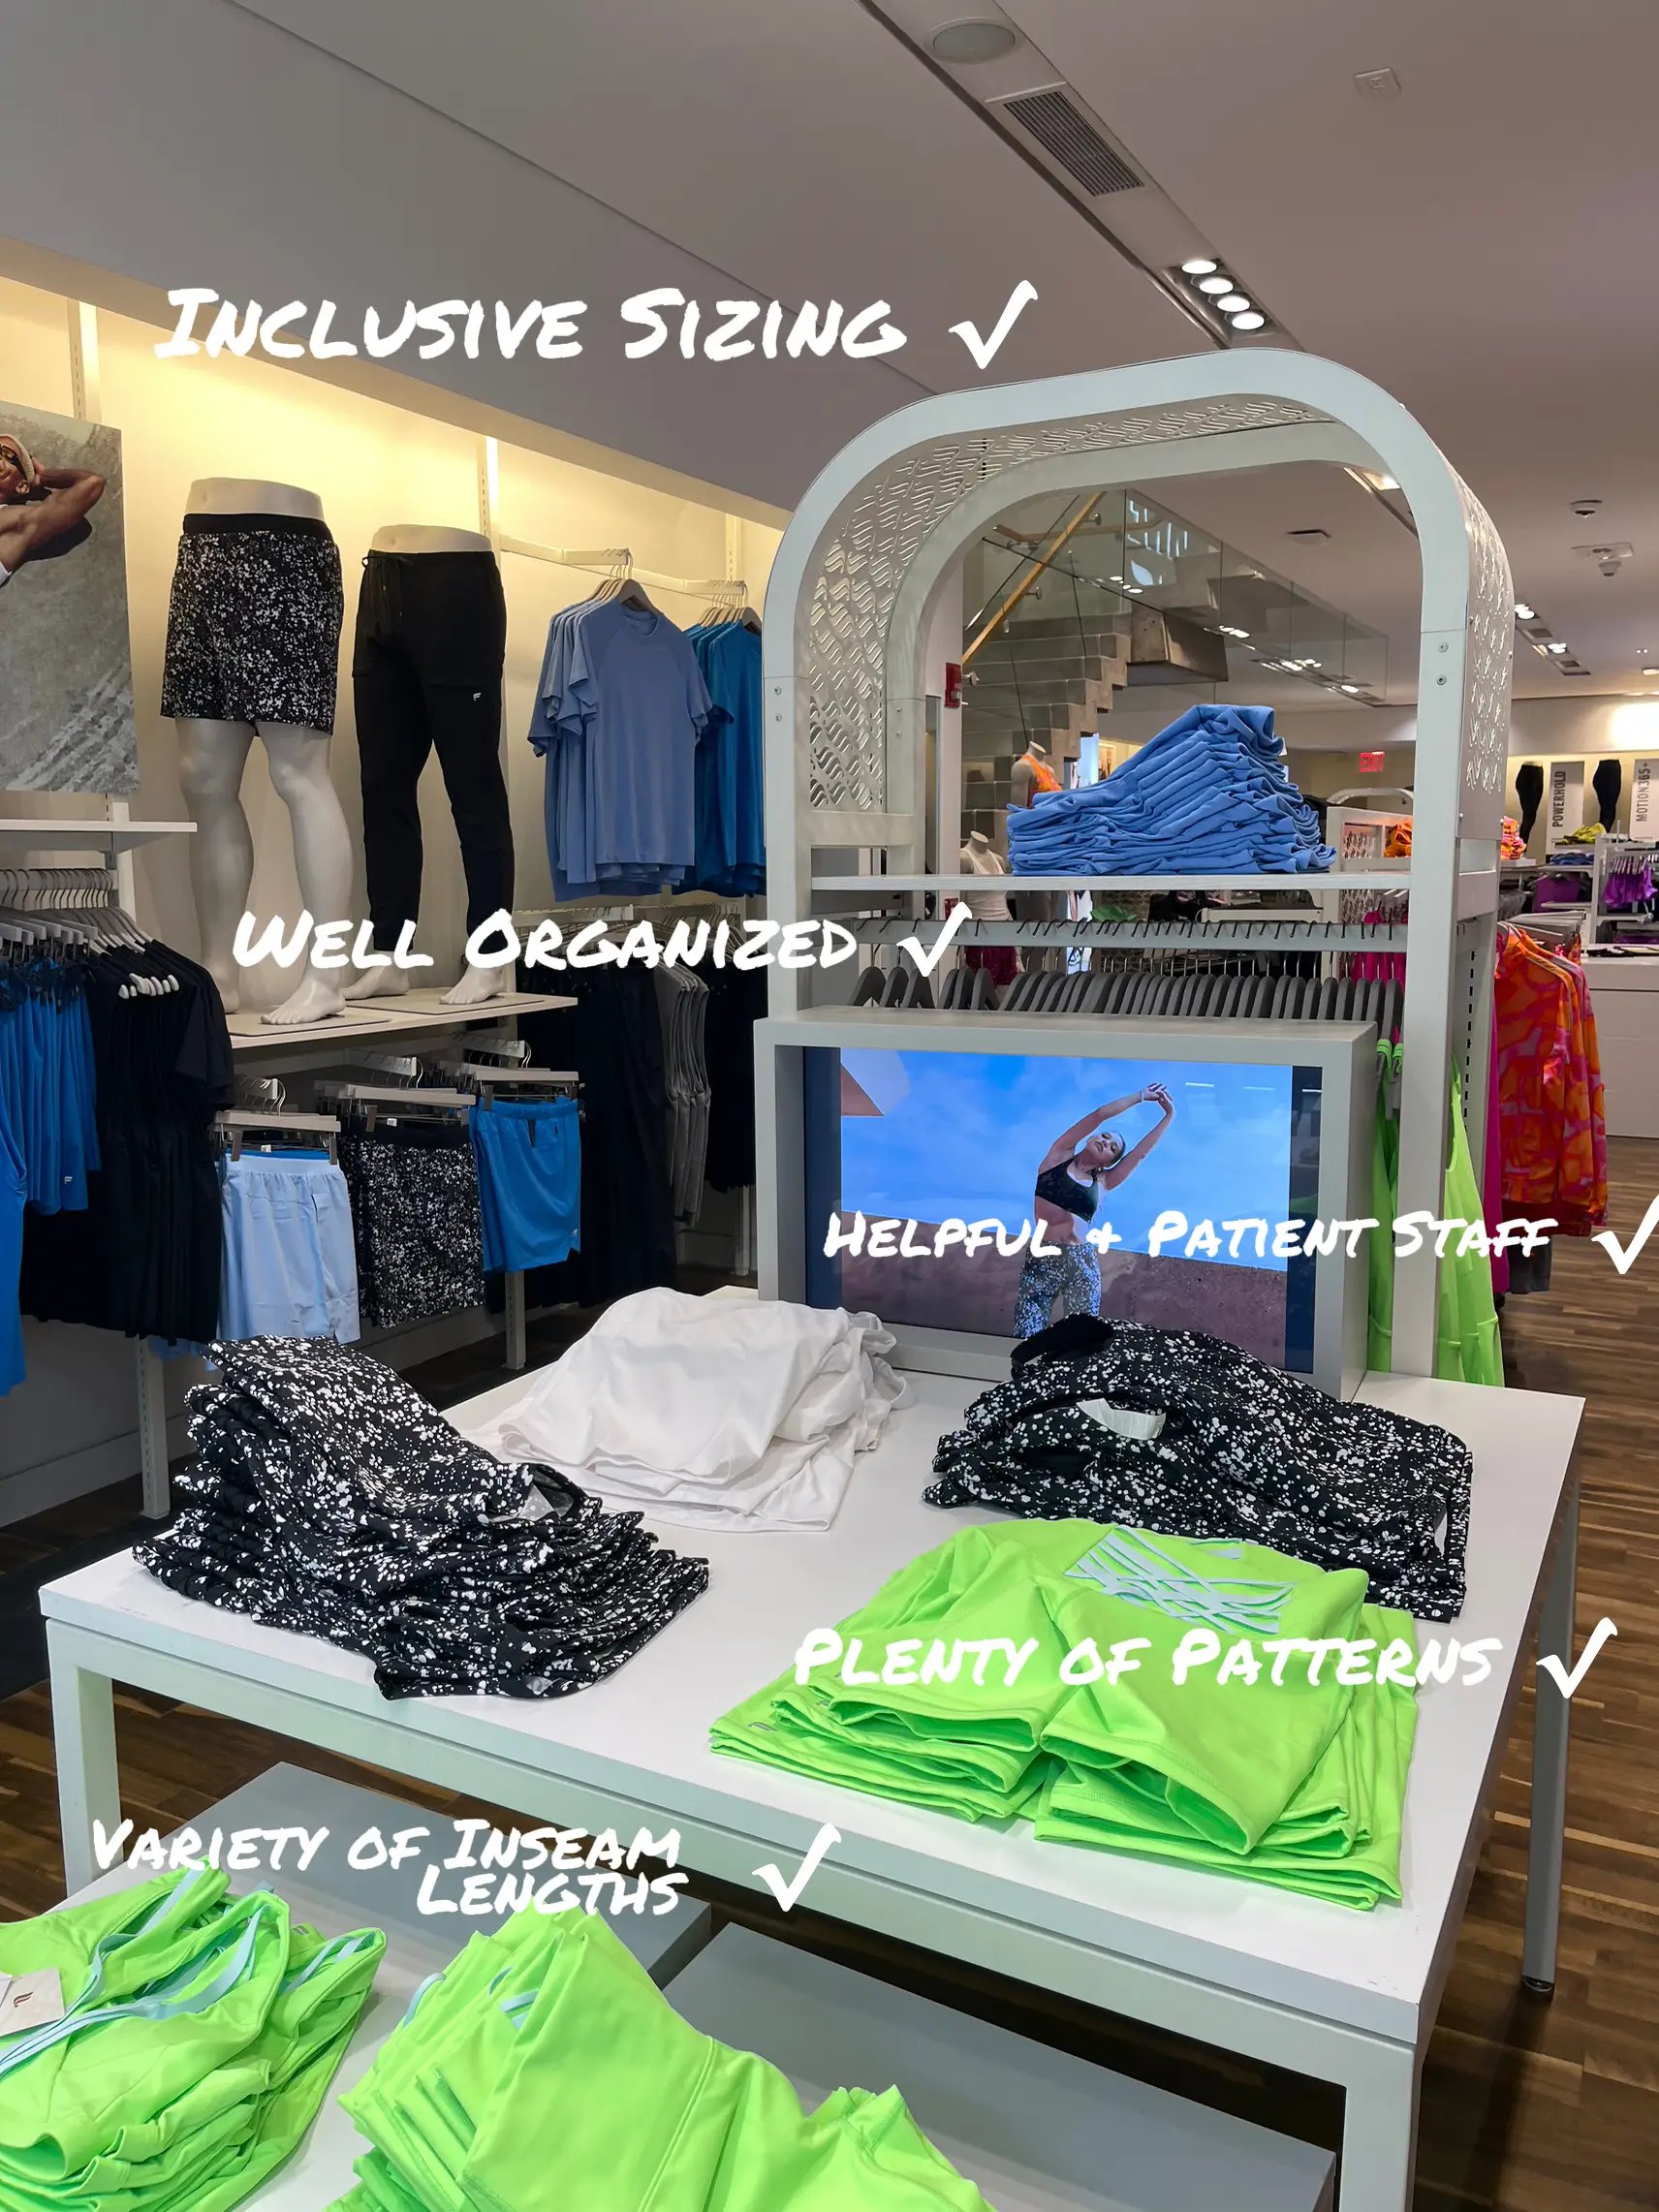 Fabletics to Open 24 New Stores – Visual Merchandising and Store